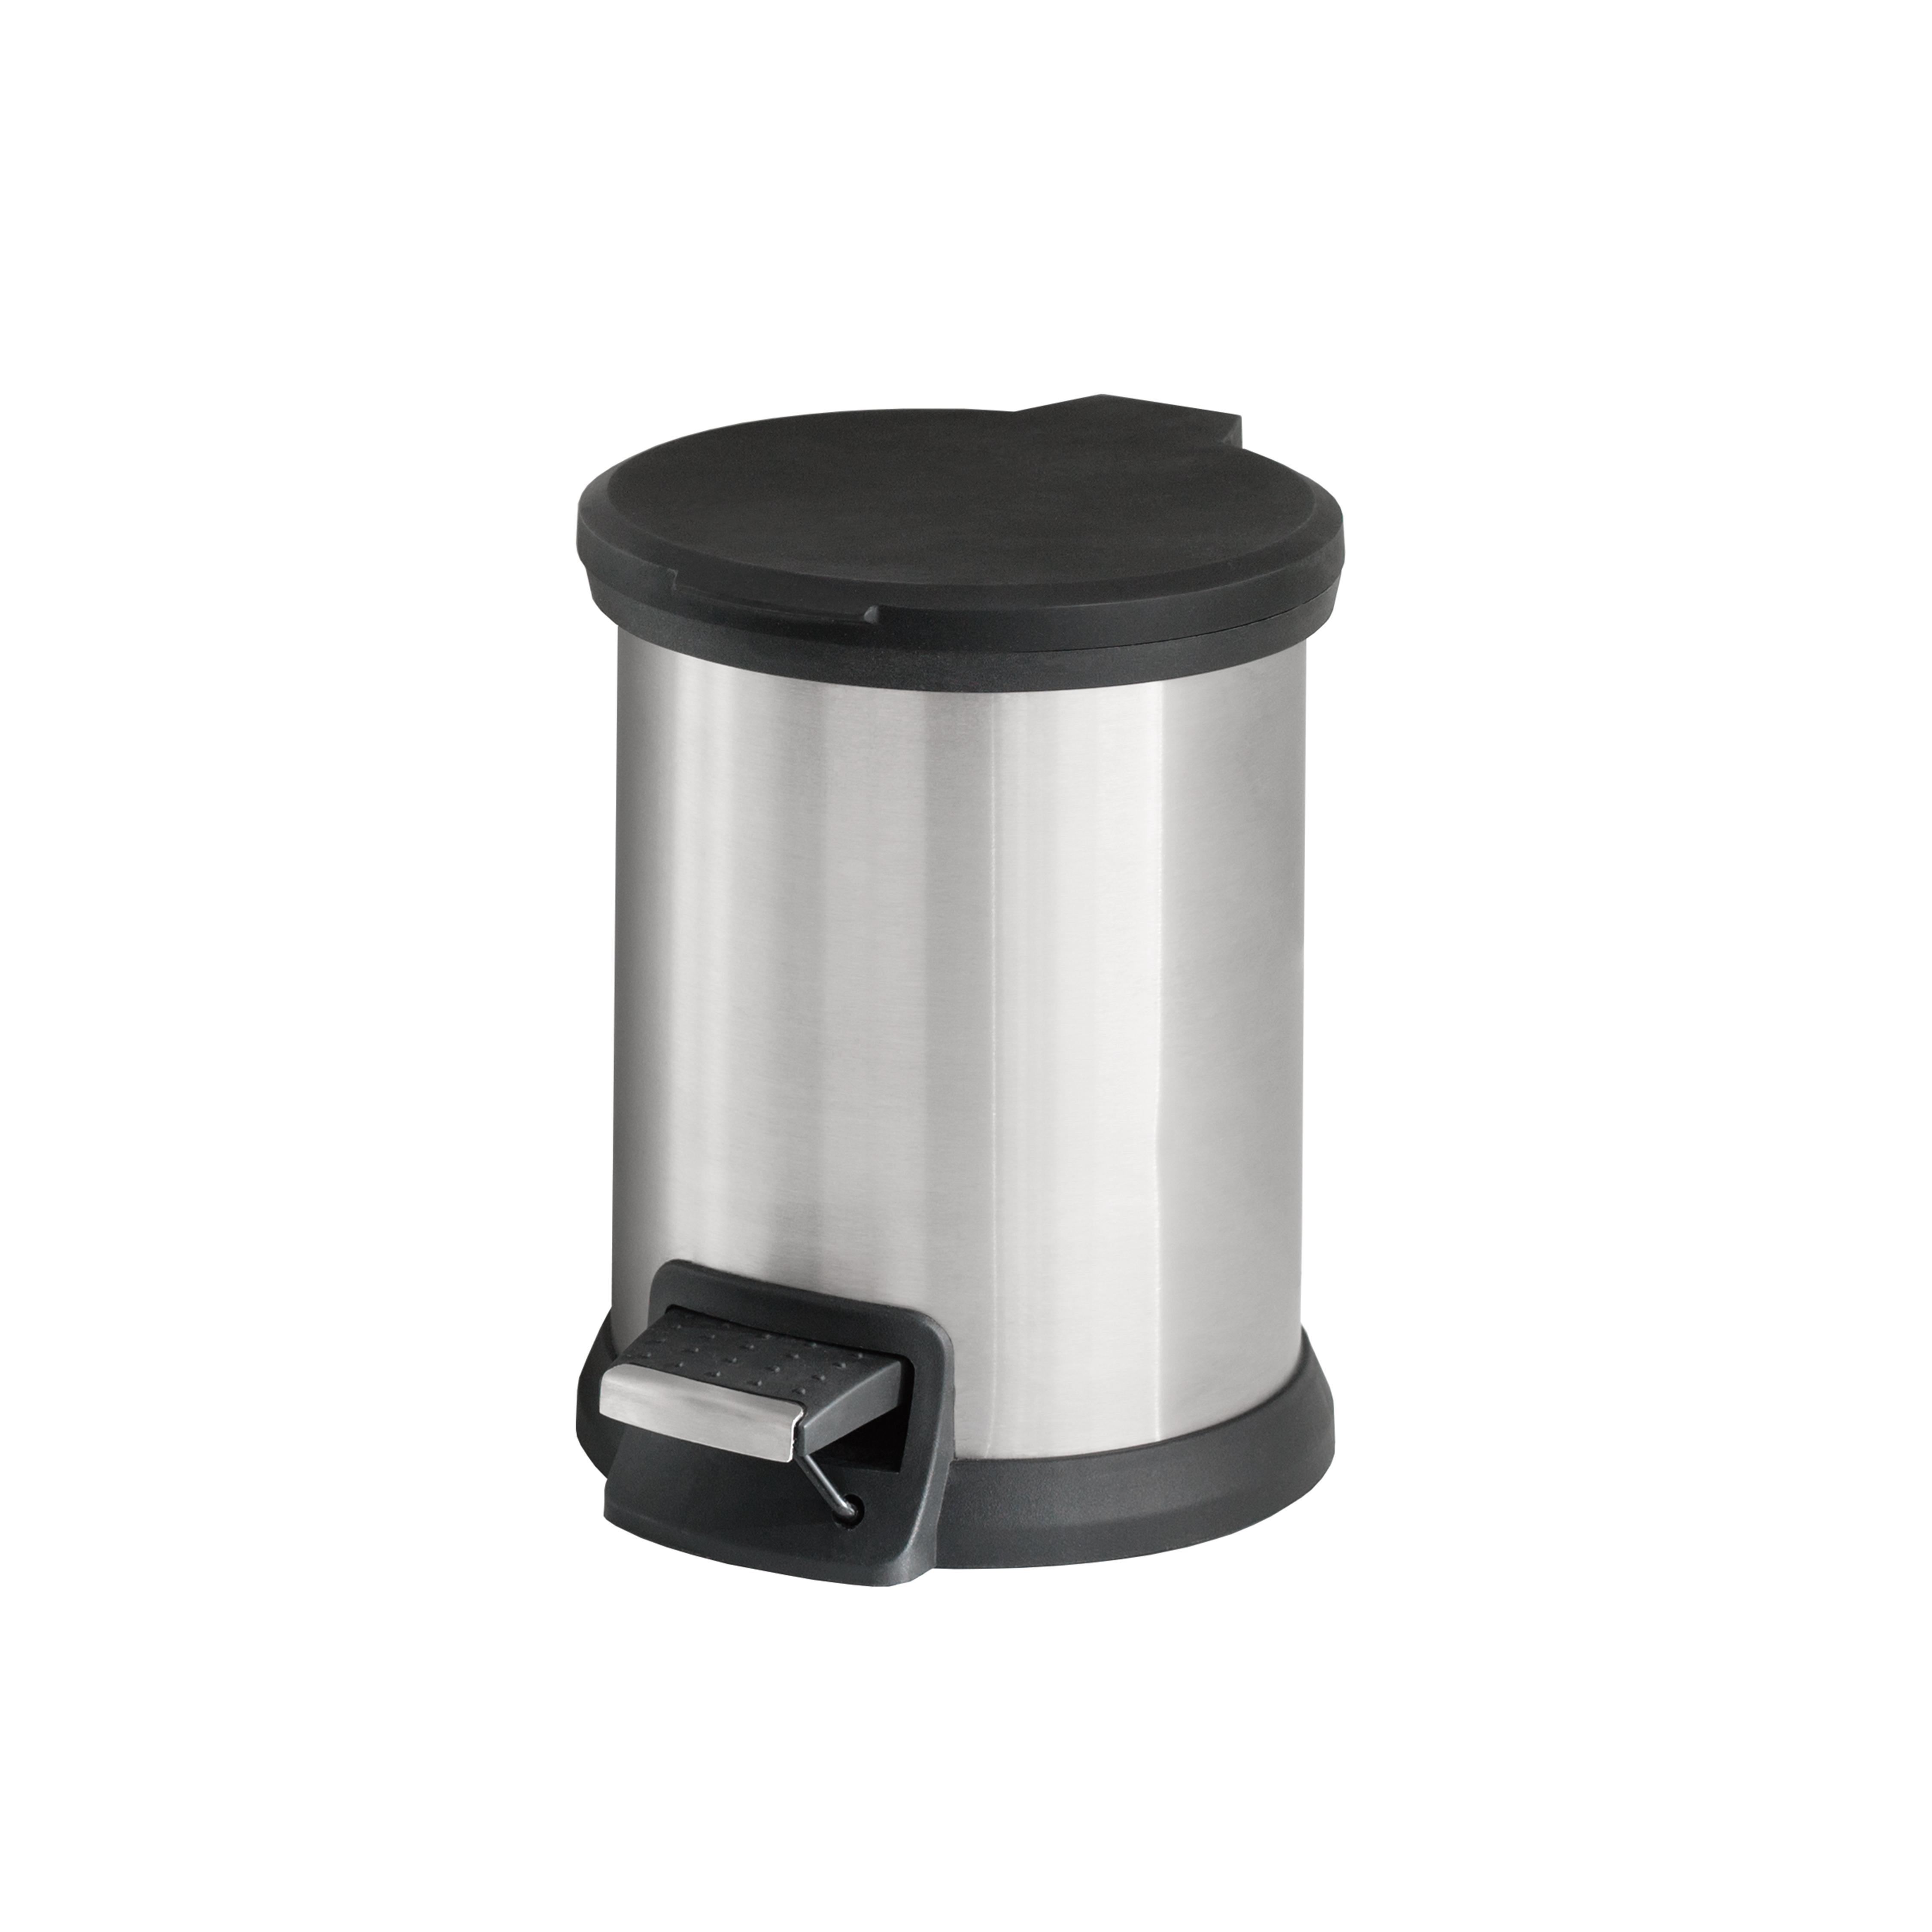 Mainstays 3-Piece Stainless Steel 1.3 and 8 gal Kitchen Garbage Can Combo - image 3 of 7